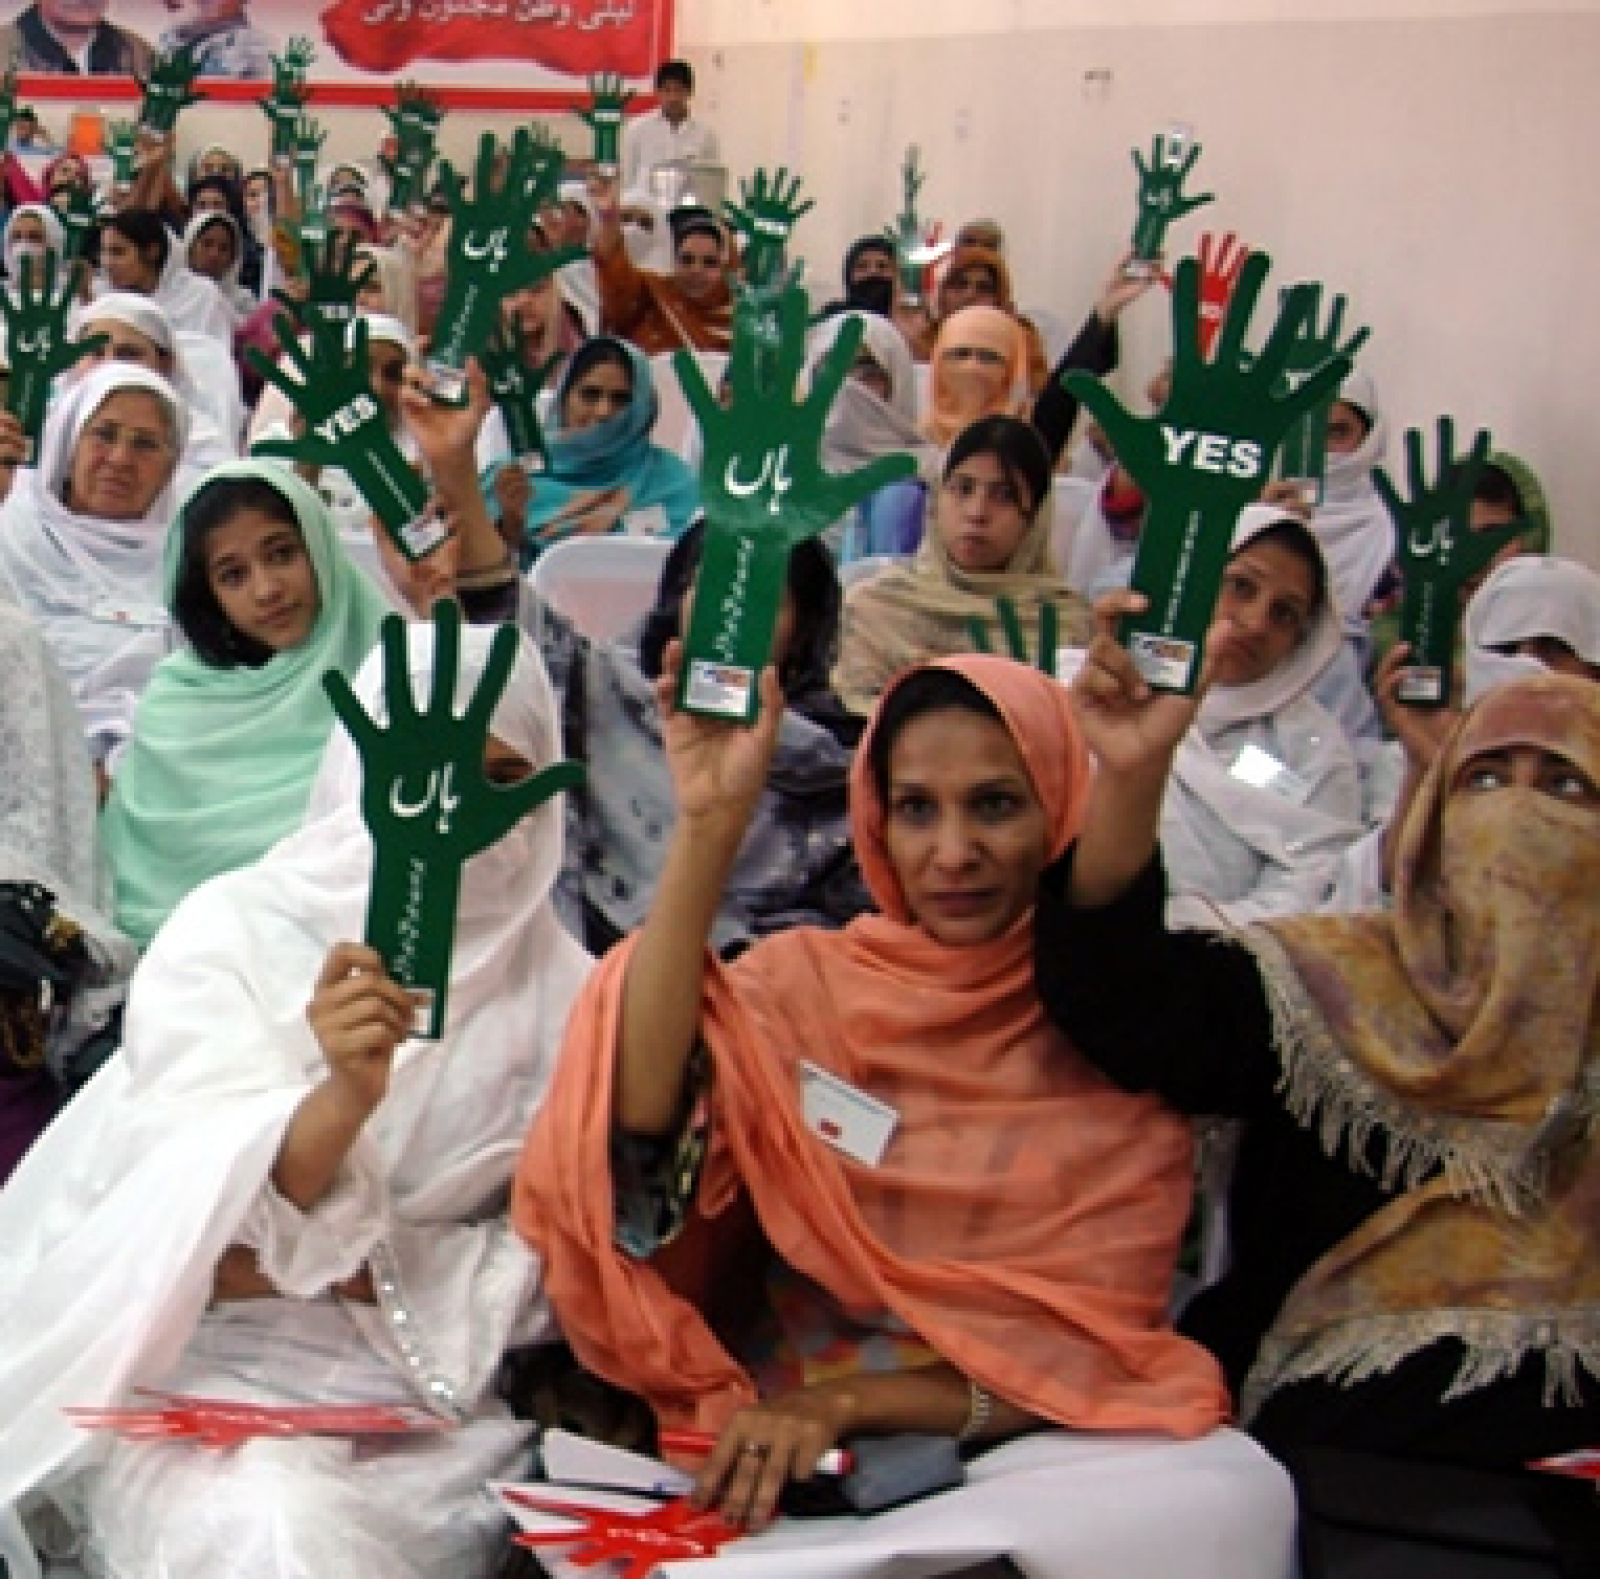 Women in Pakistan Identify Vital Issues for Party Platforms